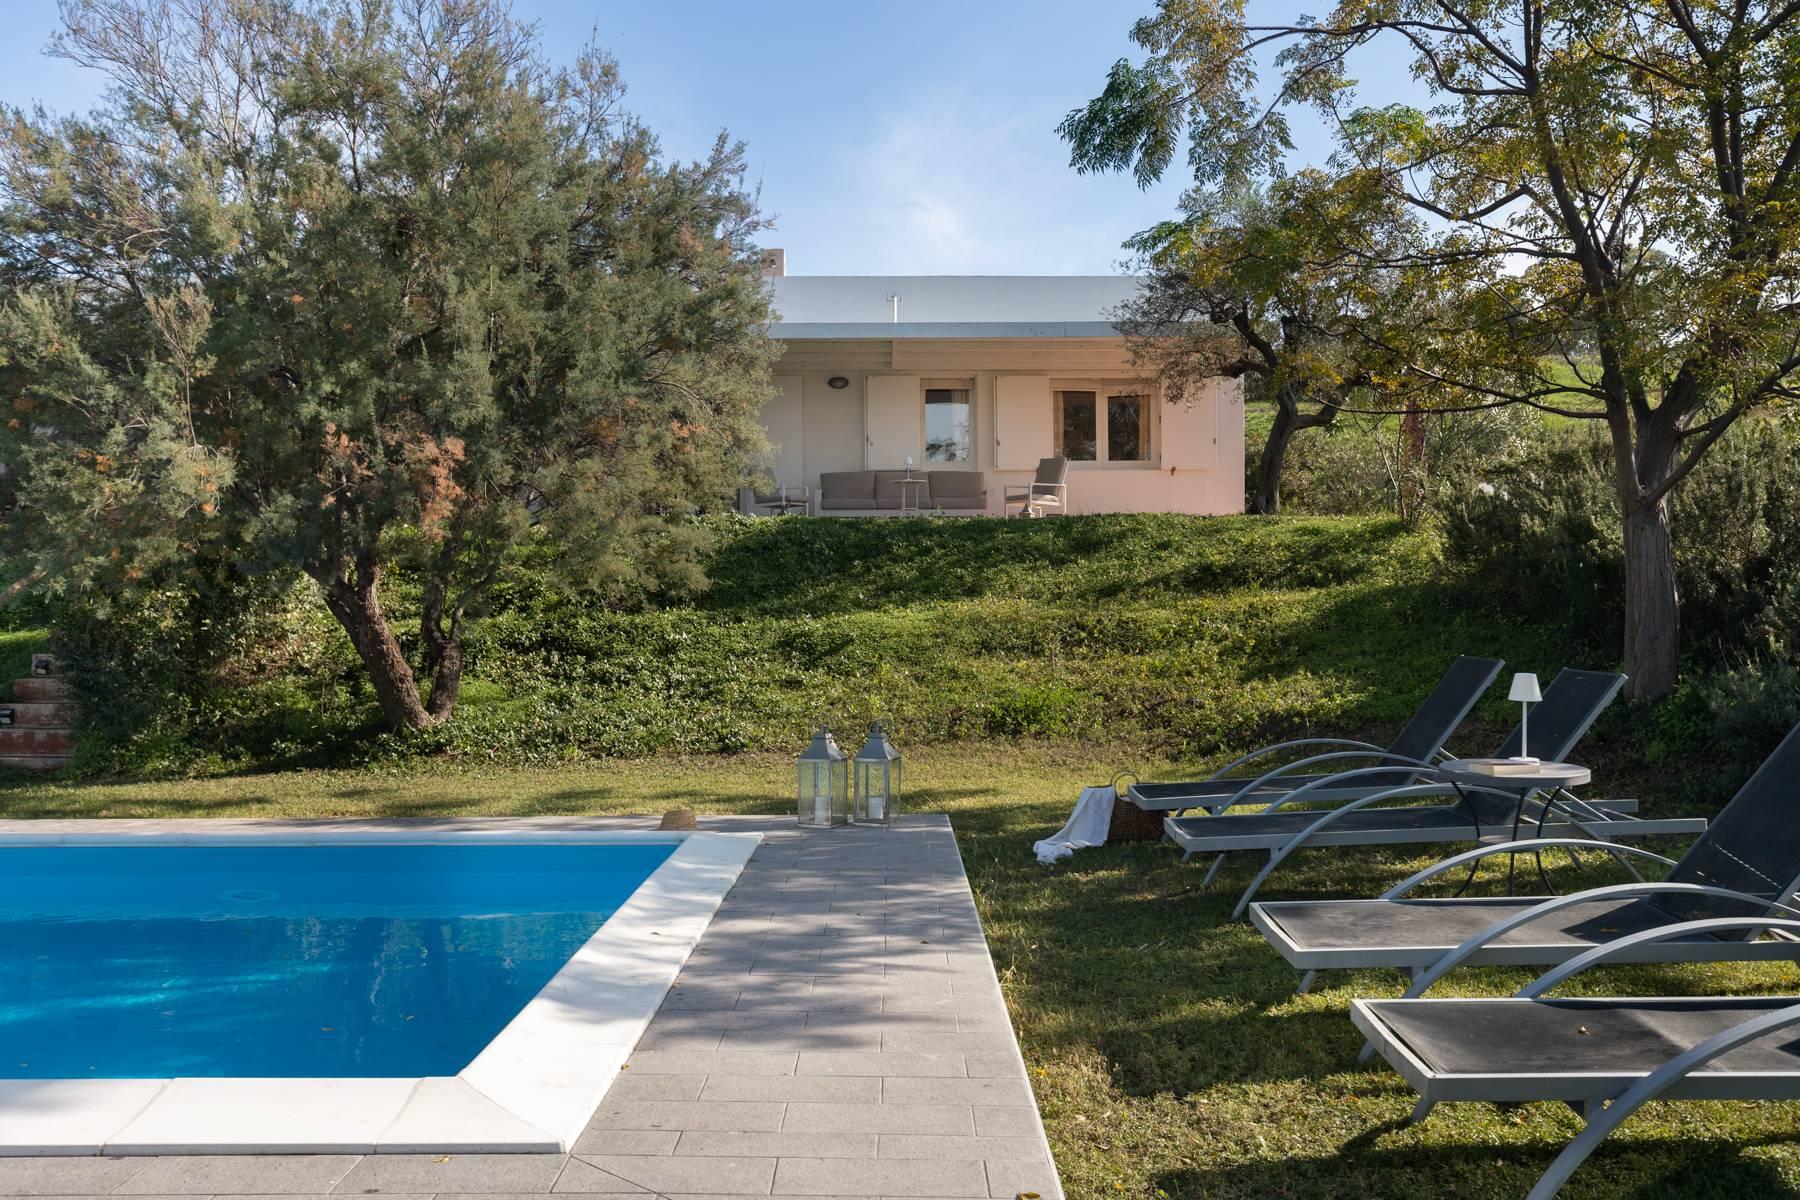 Villa with swimming pool 1km from the sea - 5